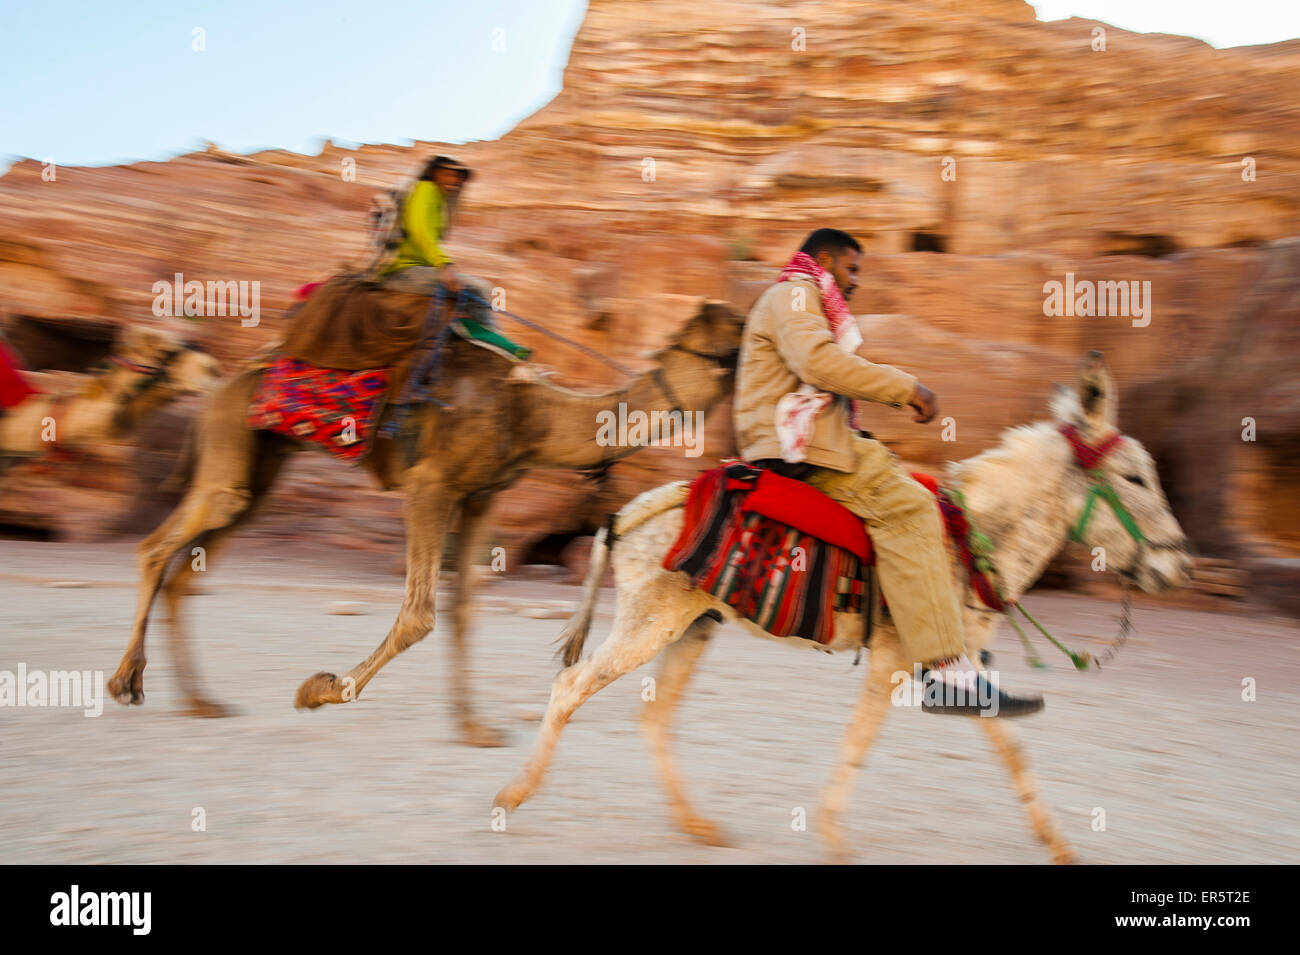 Men riding on a camel and a donkey, Petra, Jordan, Middle East Stock Photo